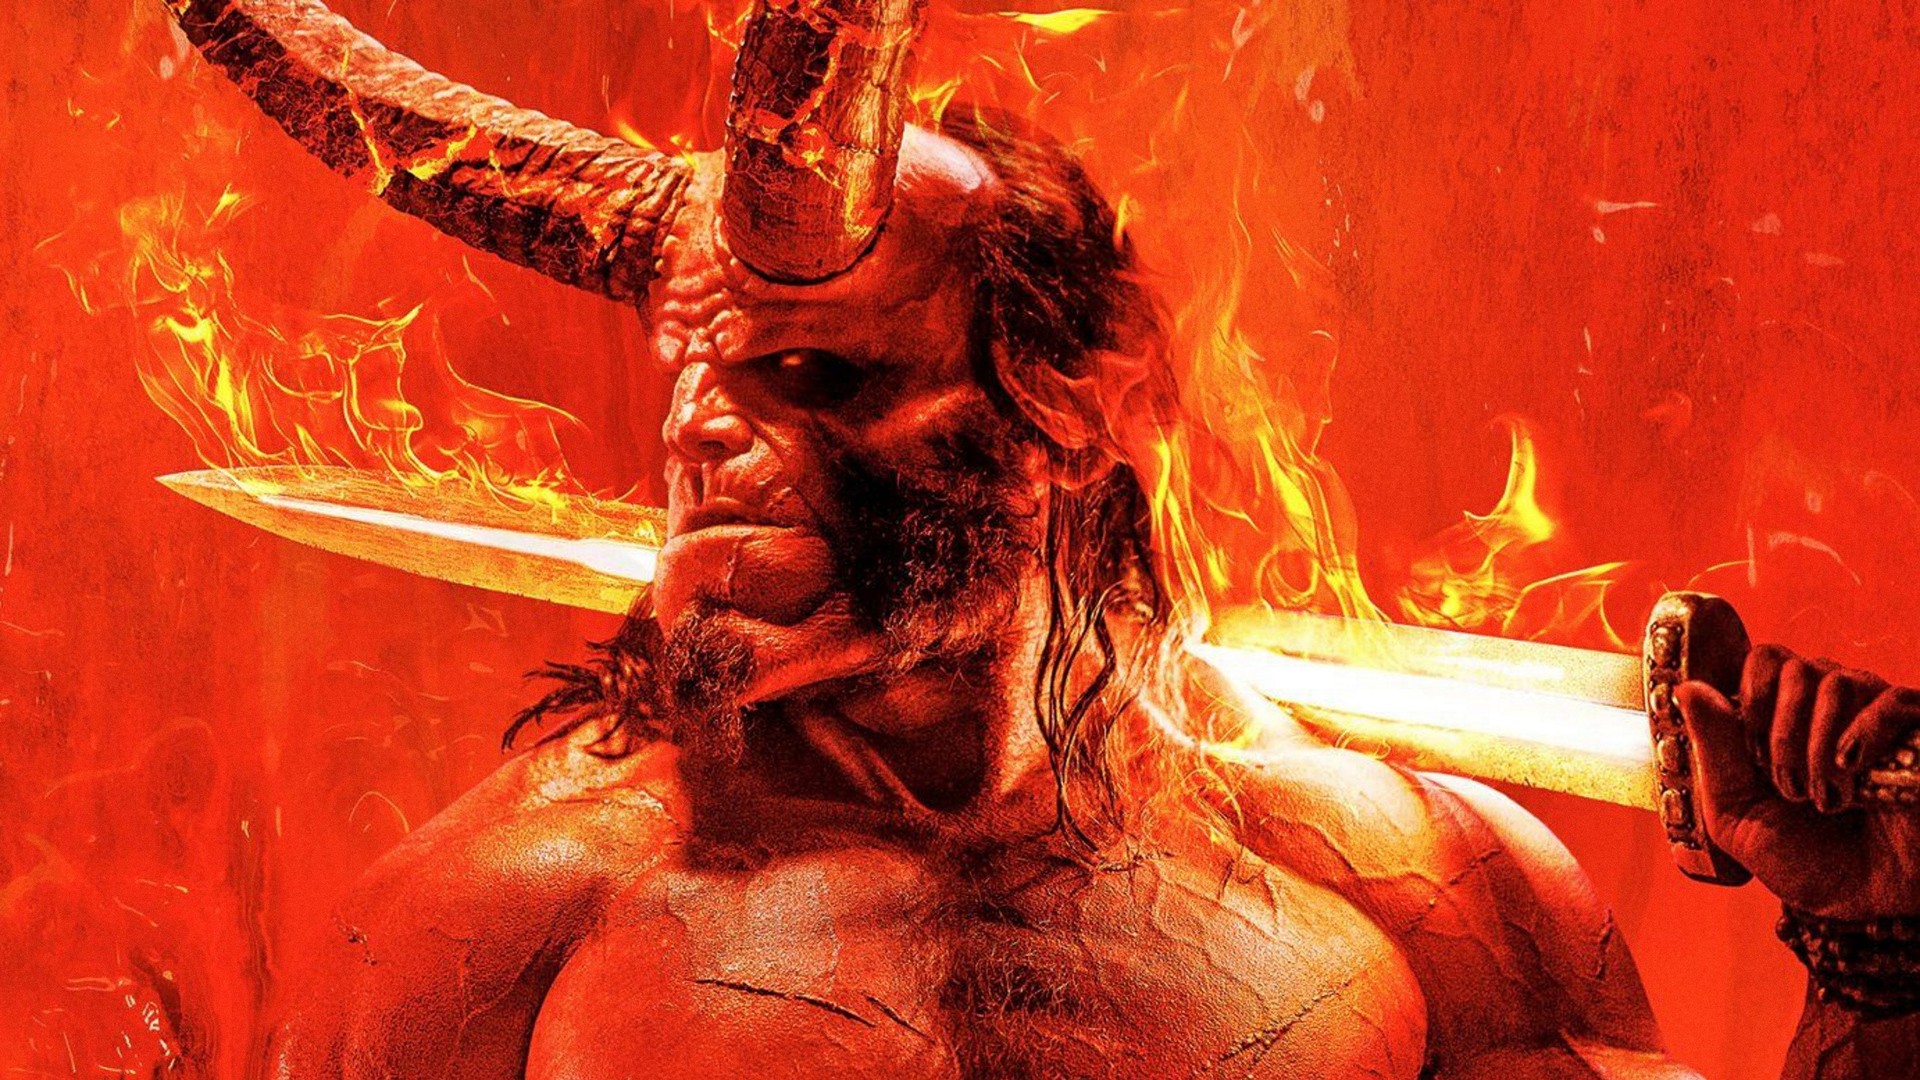 Hellboy 2019 Wallpaper with high-resolution 1920x1080 pixel. You can use this wallpaper for your Windows and Mac OS computers as well as your Android and iPhone smartphones